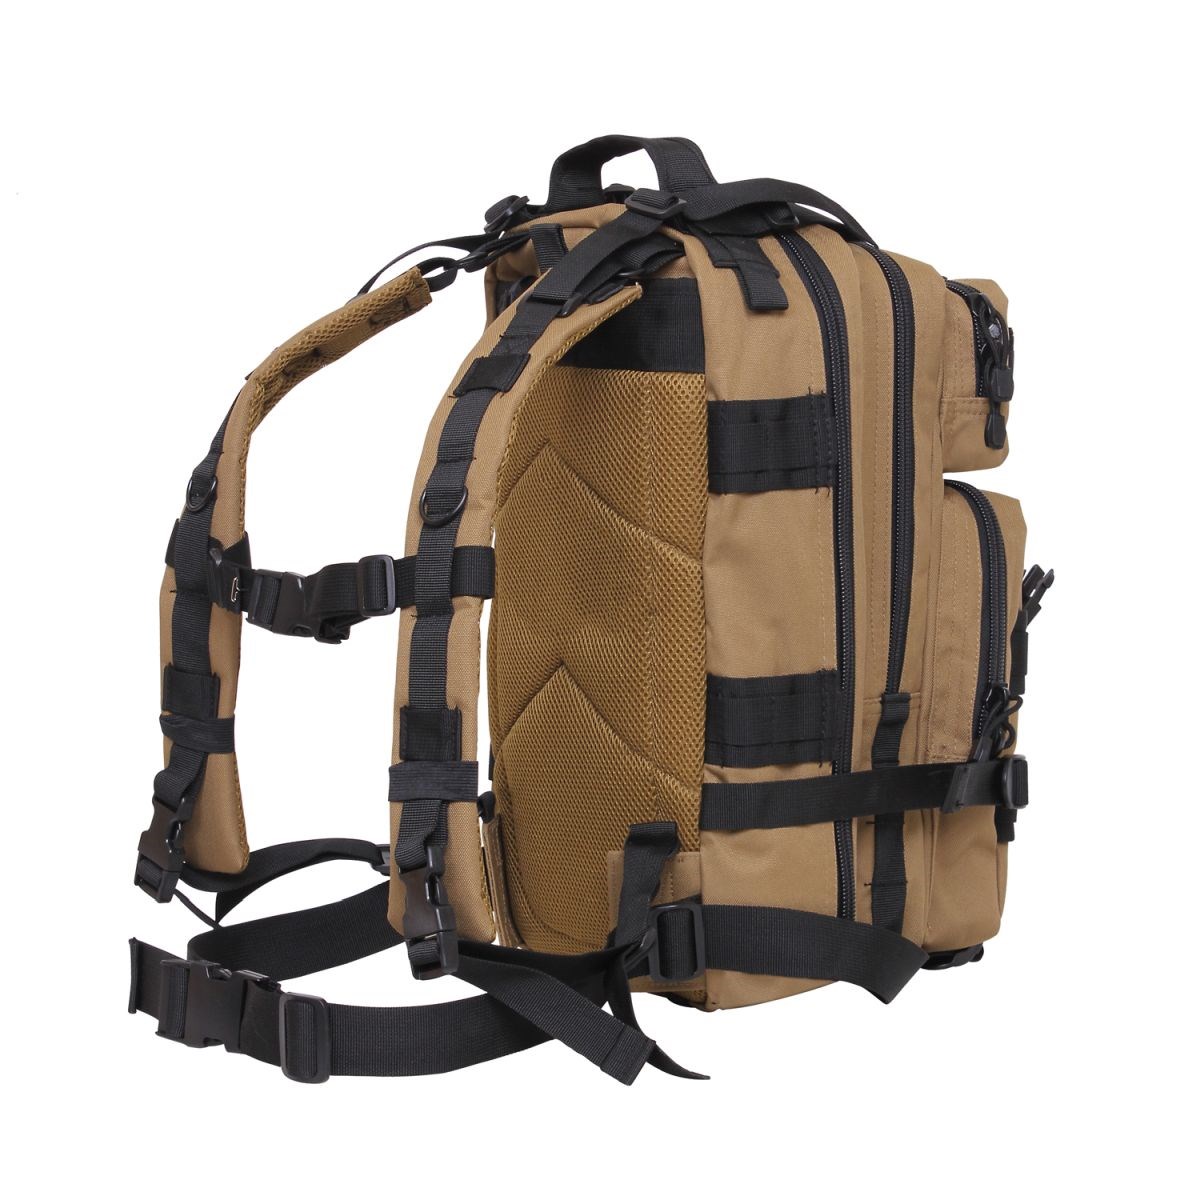 Medium TRANSPORT Pack COYOTE/BROWN ROTHCO 2647 L-11